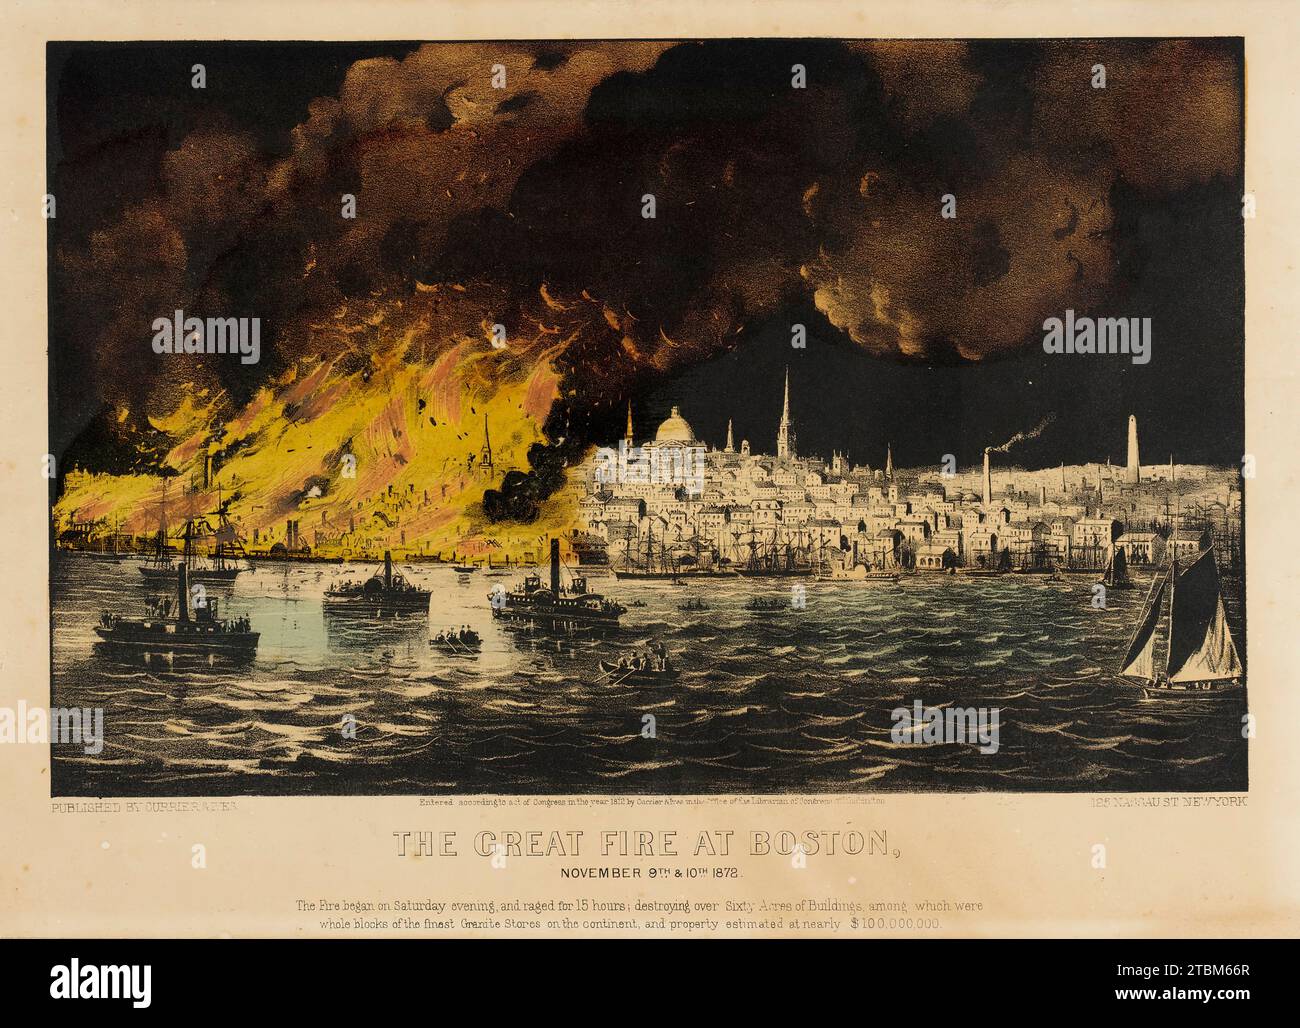 The Great Fire at Boston (image 1 of 2), 1872. Stock Photo